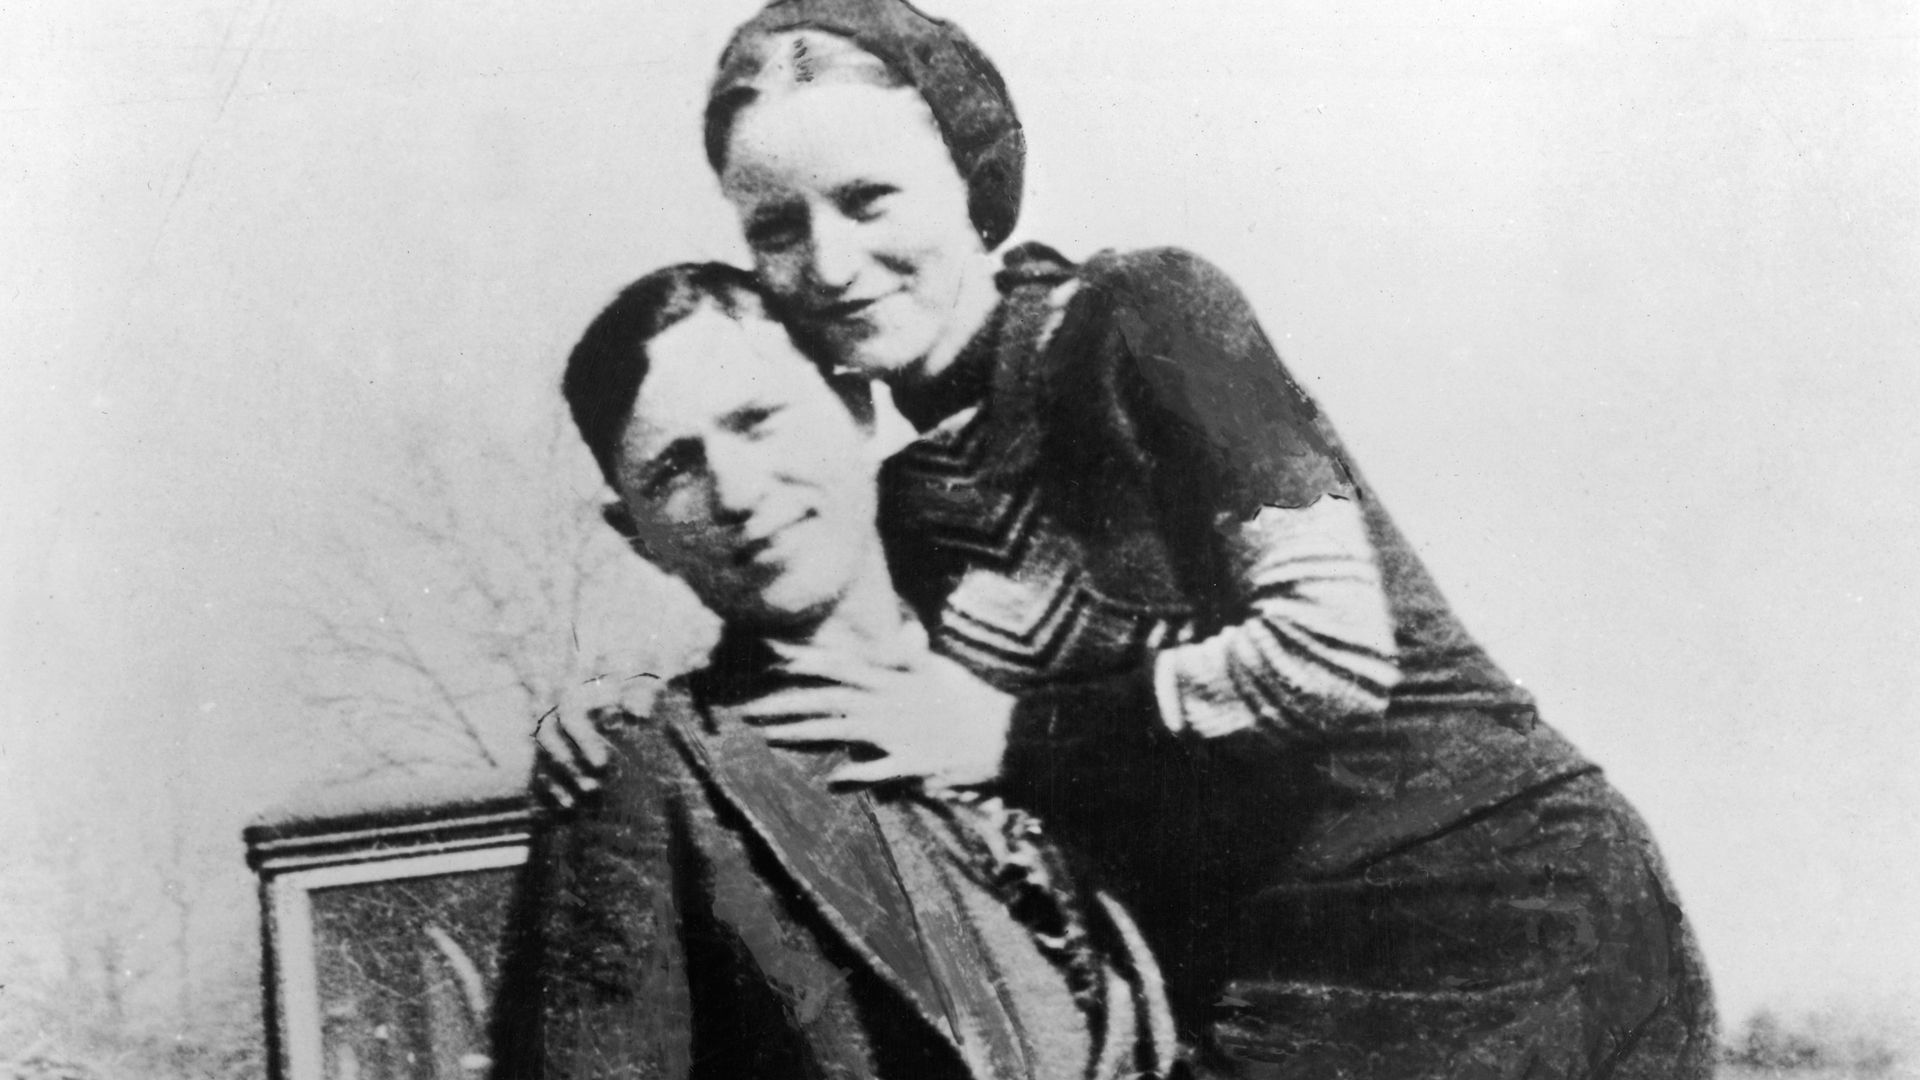 Bonnie and Clyde: 9 About the Outlawed